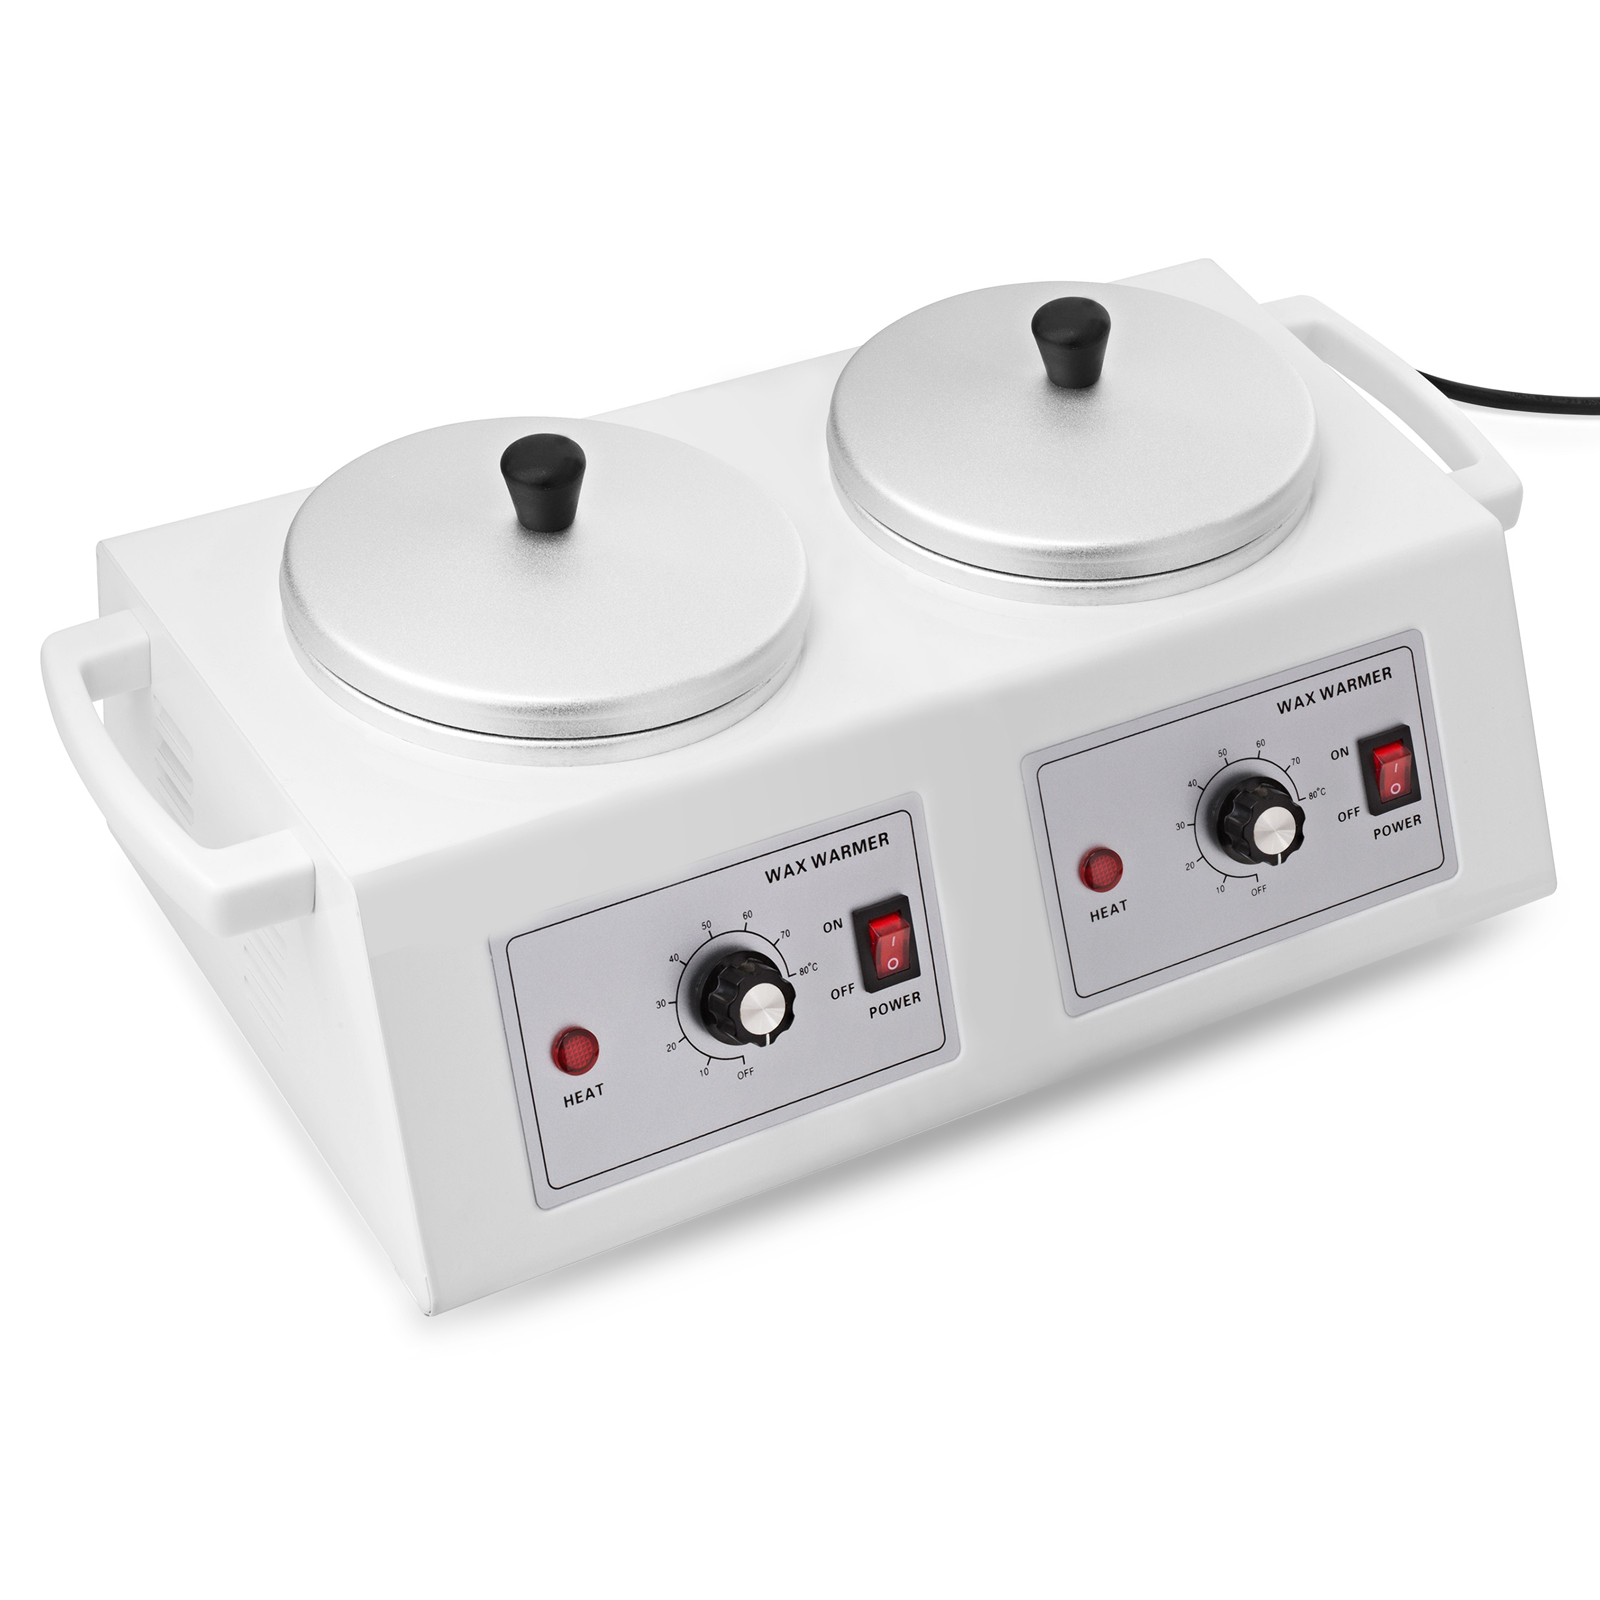 Salon Sundry Professional Double Pot Electric Wax Warmer Machine for Hair Removal or Paraffin